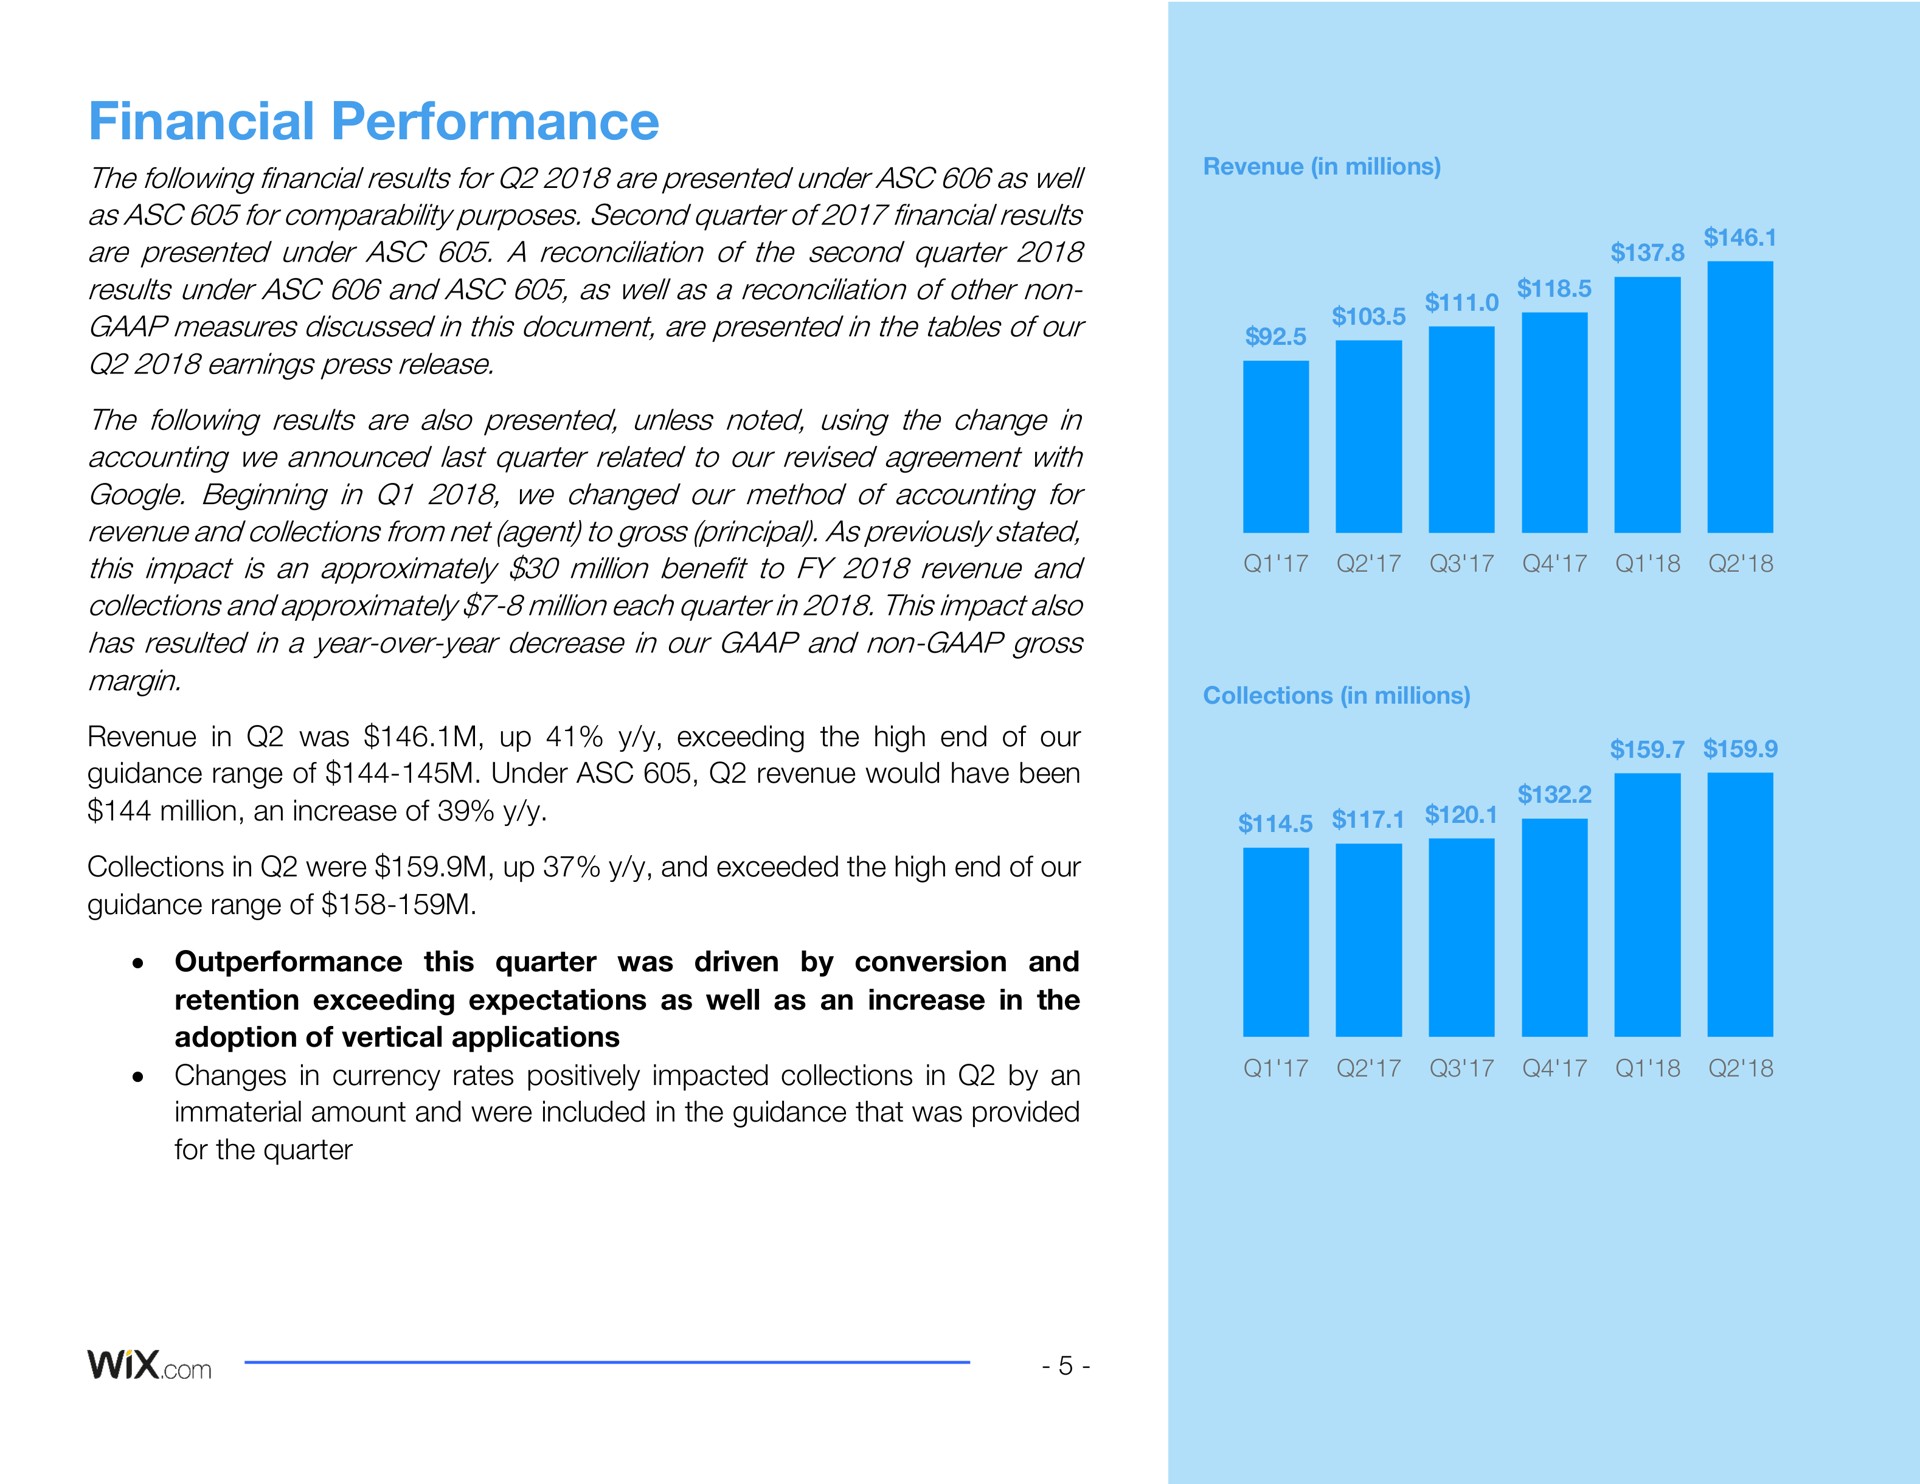 financial performance the following financial results for are presented under as well as for comparability purposes second quarter of financial results are presented under a reconciliation of the second quarter results under and as well as a reconciliation of other non measures discussed in this document are presented in the tables of our earnings press release the following results are also presented unless noted using the change in accounting we announced last quarter related to our revised agreement with beginning in we changed our method of accounting for revenue and collections from net agent to gross principal as previously stated this impact is an approximately million benefit to revenue and collections and approximately million each quarter in this impact also has resulted in a year over year decrease in our and non gross margin revenue in was up exceeding the high end of our guidance range of under revenue would have been million an increase of collections in were up and exceeded the high end of our guidance range of this quarter was driven by conversion and retention exceeding expectations as well as an increase in the adoption of vertical applications changes in currency rates positively impacted collections in by an immaterial amount and were included in the guidance that was provided for the quarter i | Wix